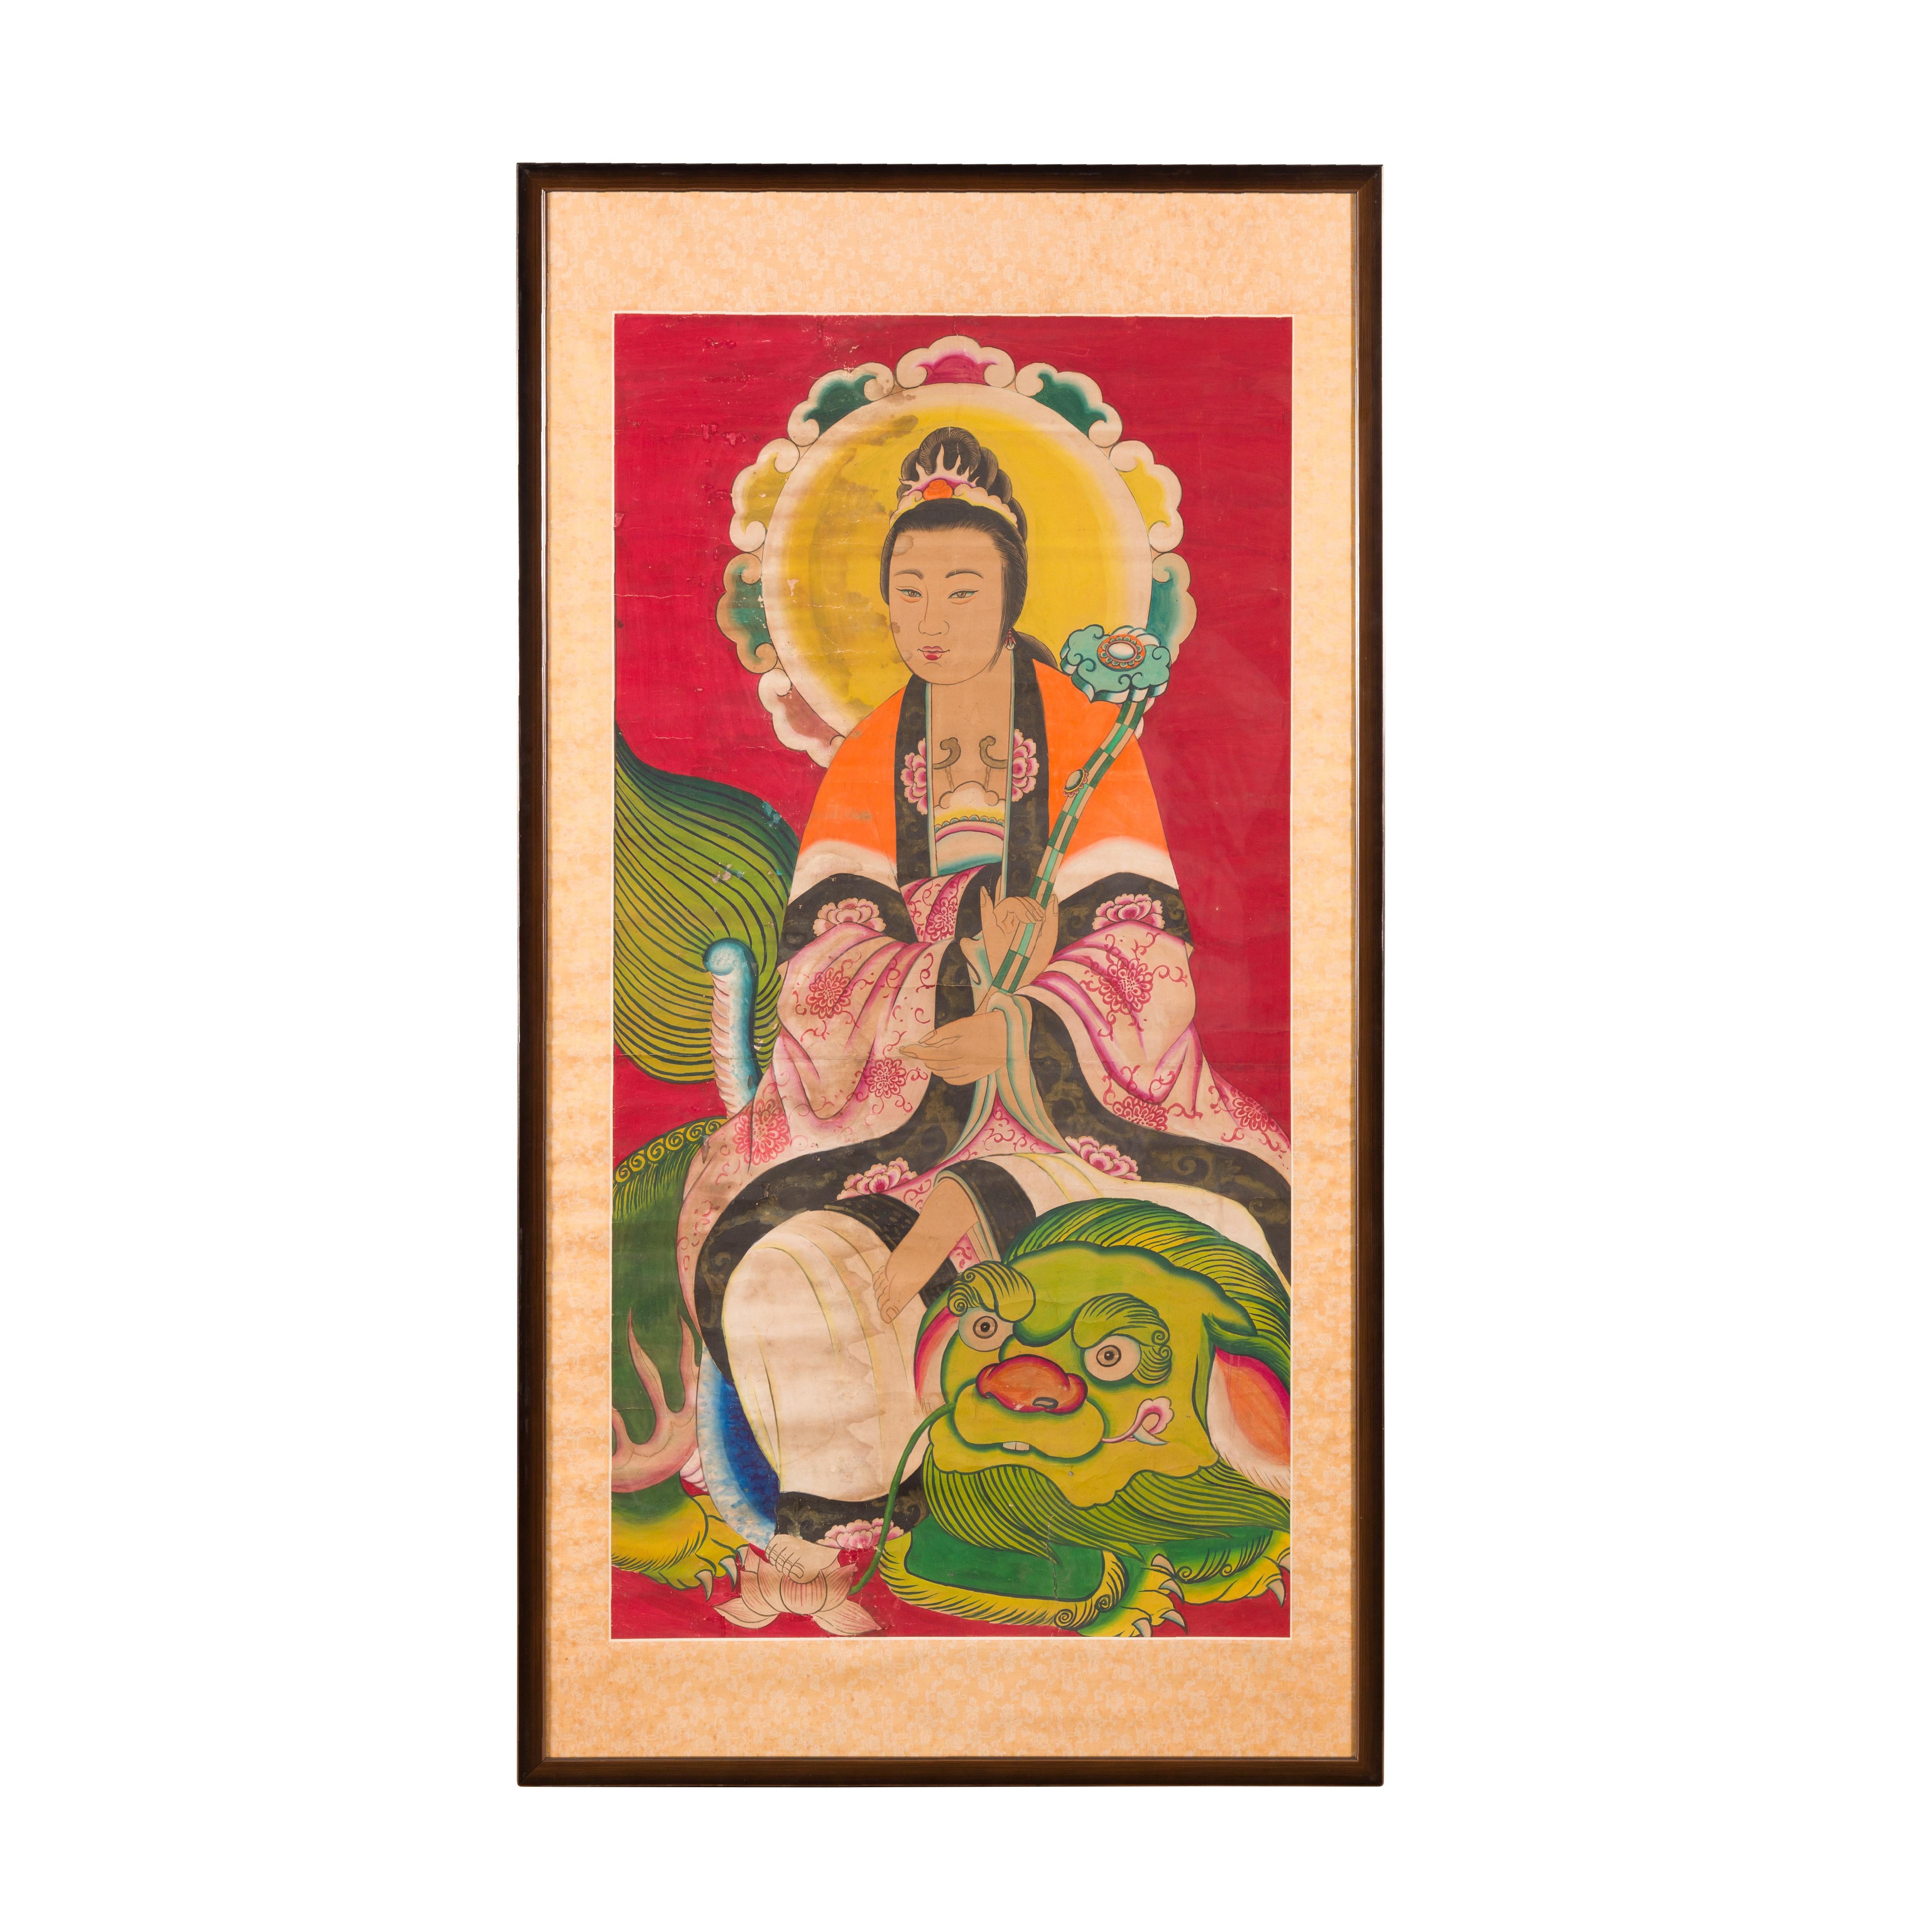 An antique Indian painting from the 19th century depicting Guanyin the Bodhisattva of Compassion sitting on a dragon. Created in India during the 19th century, this large painting features Guanyin the Bodhisattva of Compassion, sitting on the head